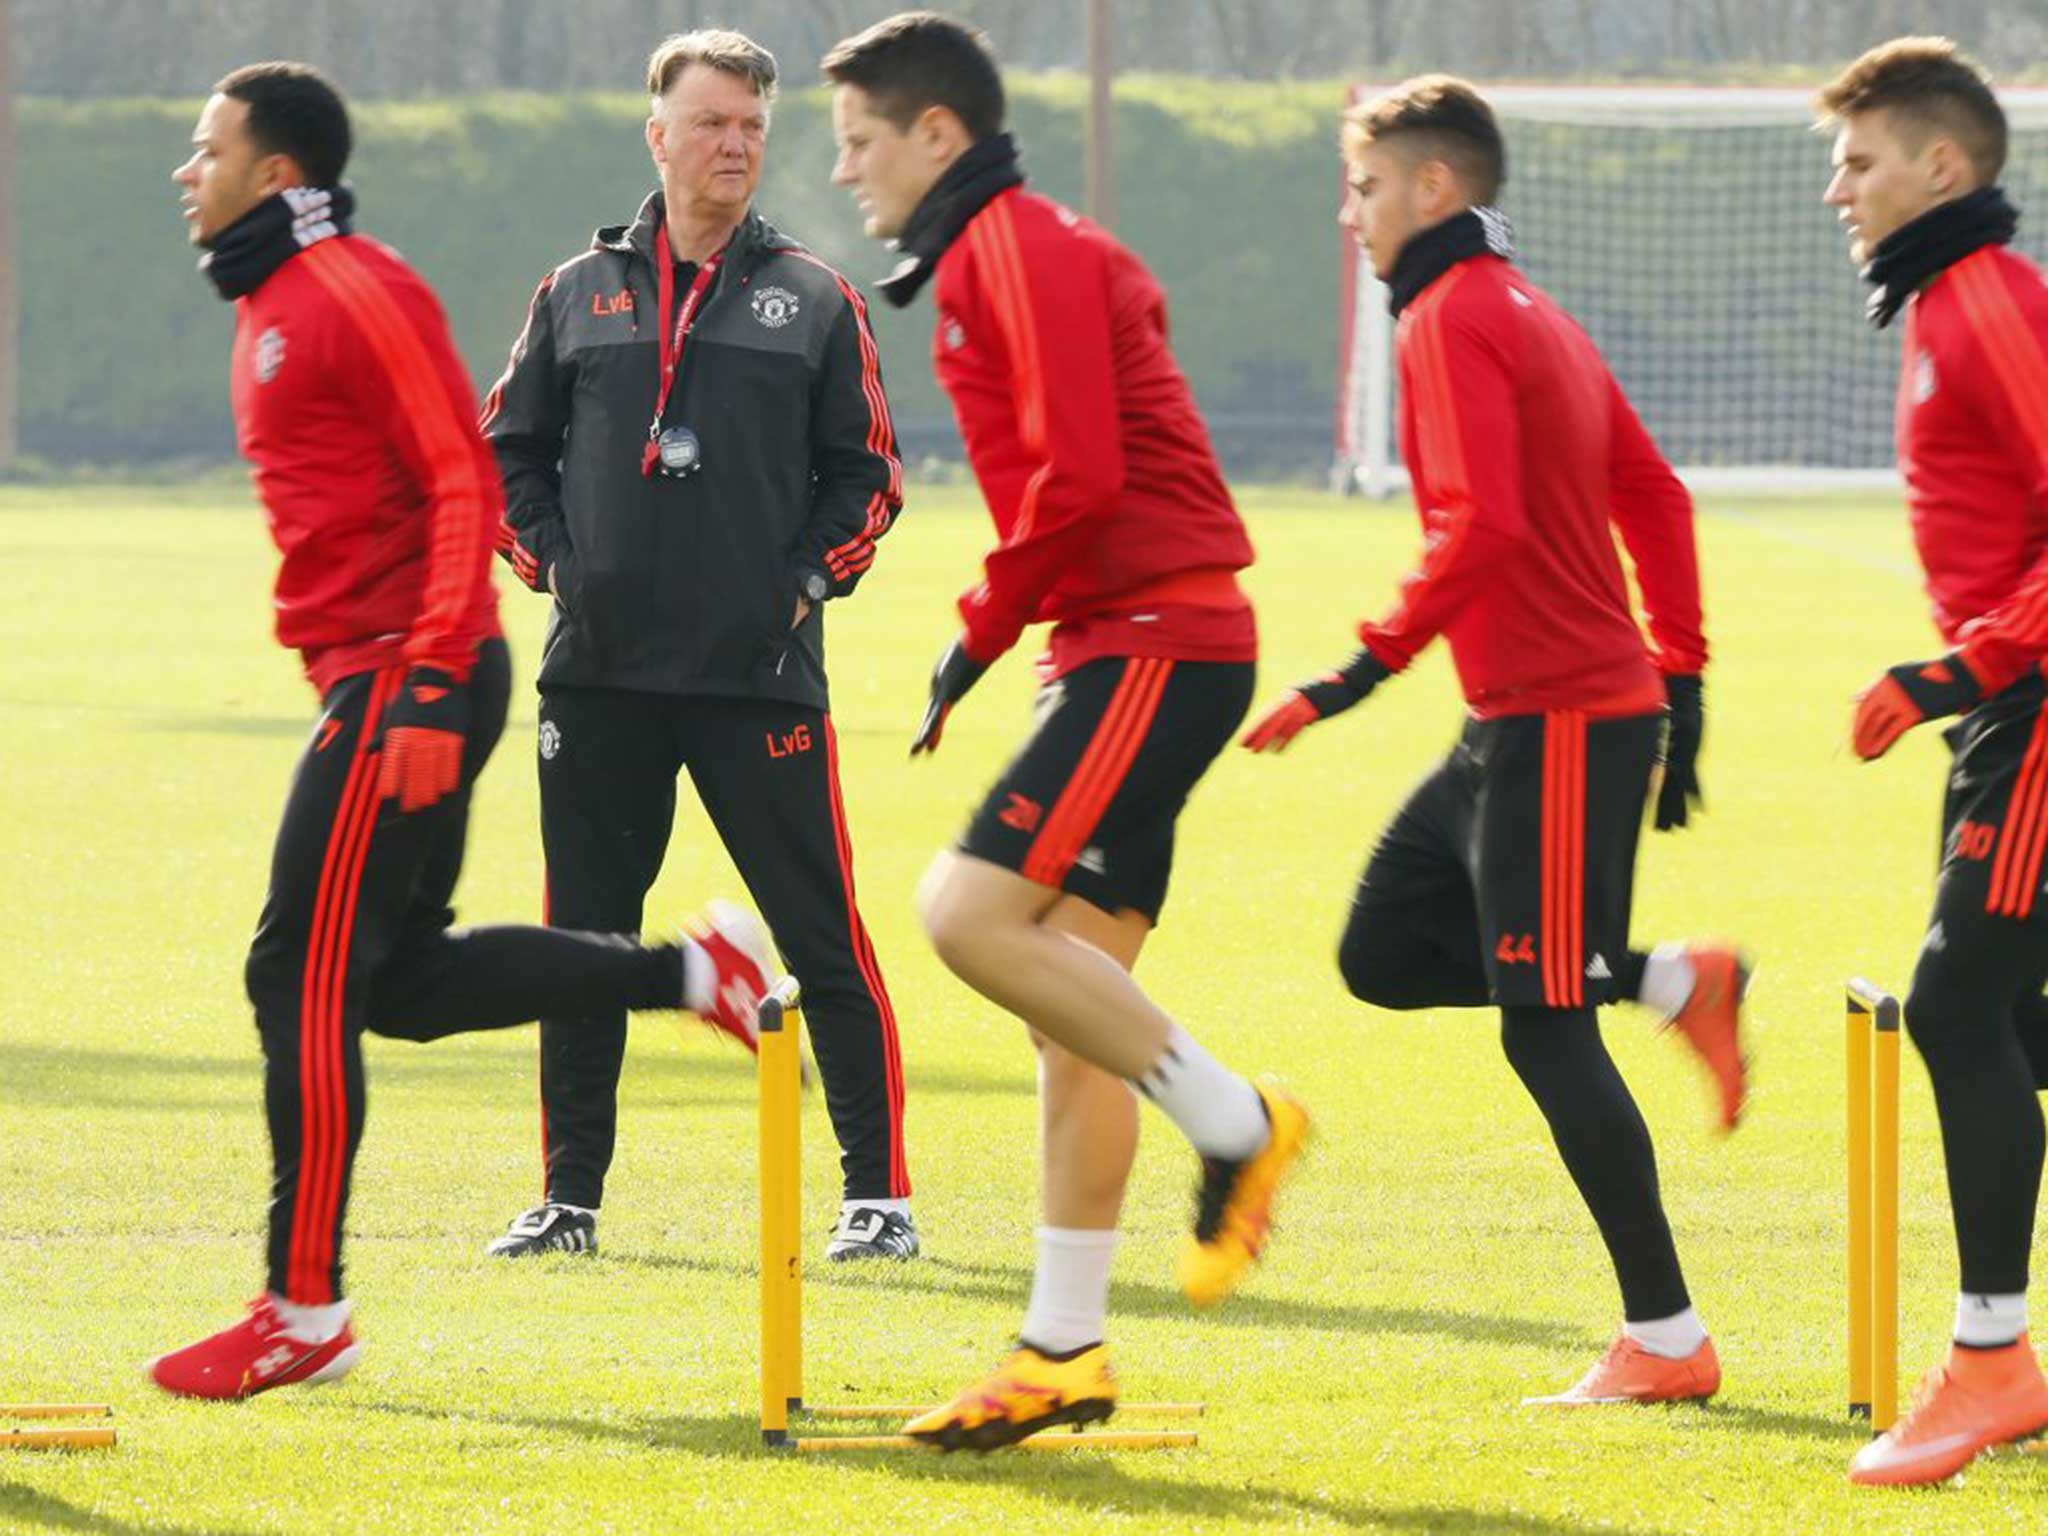 Manchester United manager Louis van Gaal oversees training